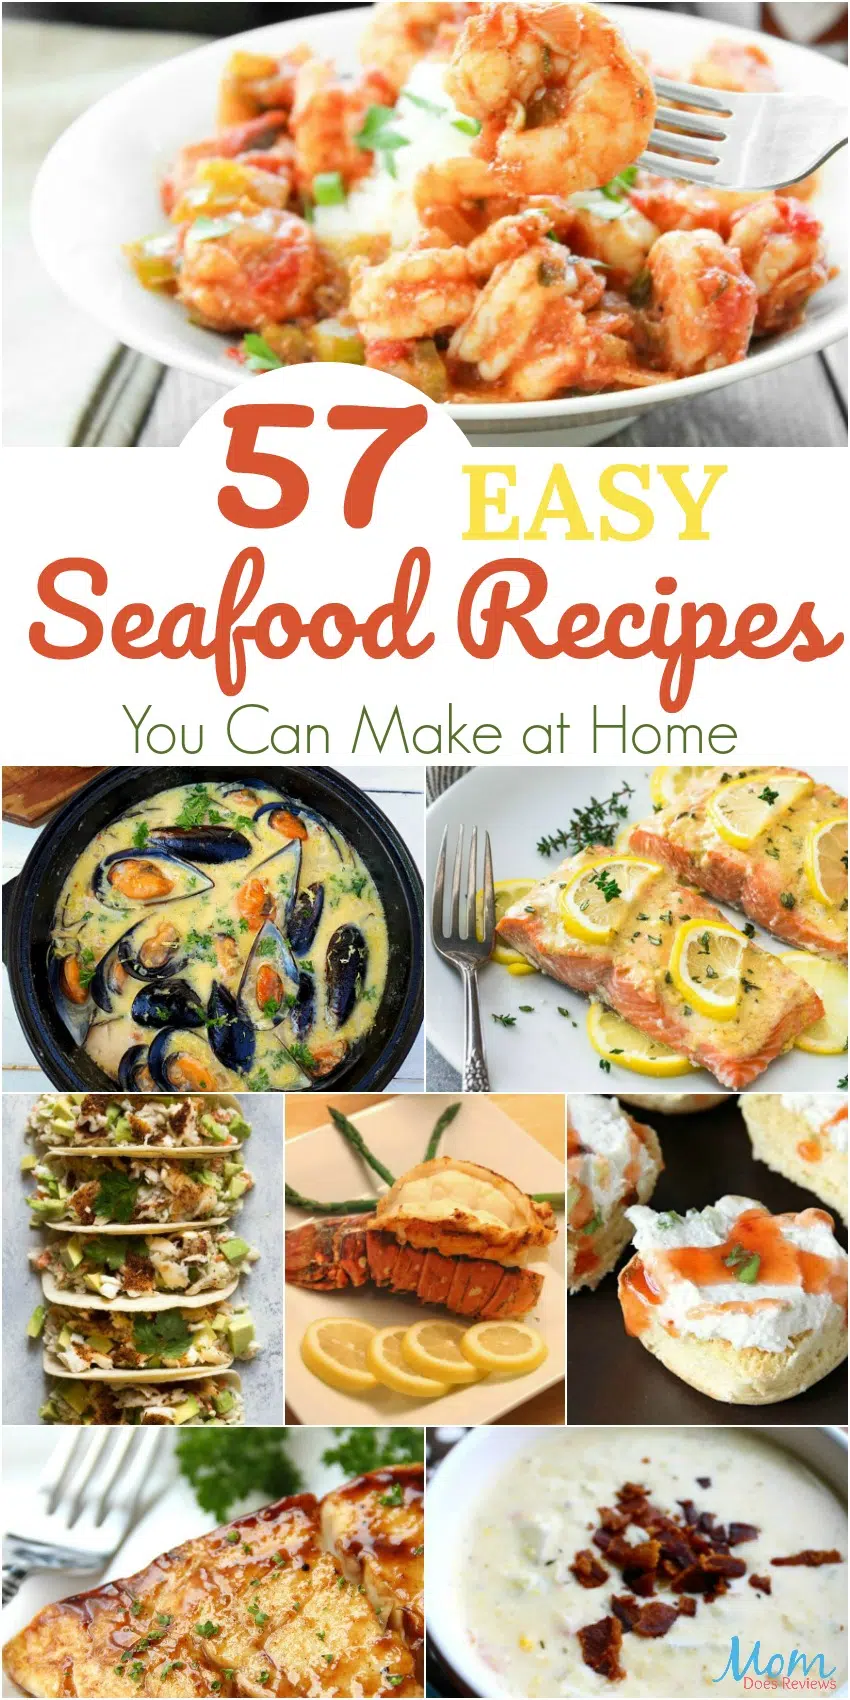 57 Easy Seafood Recipes You Can Make at Home #recipes #food #foodie #seafood #getinmybelly #healthyfood 